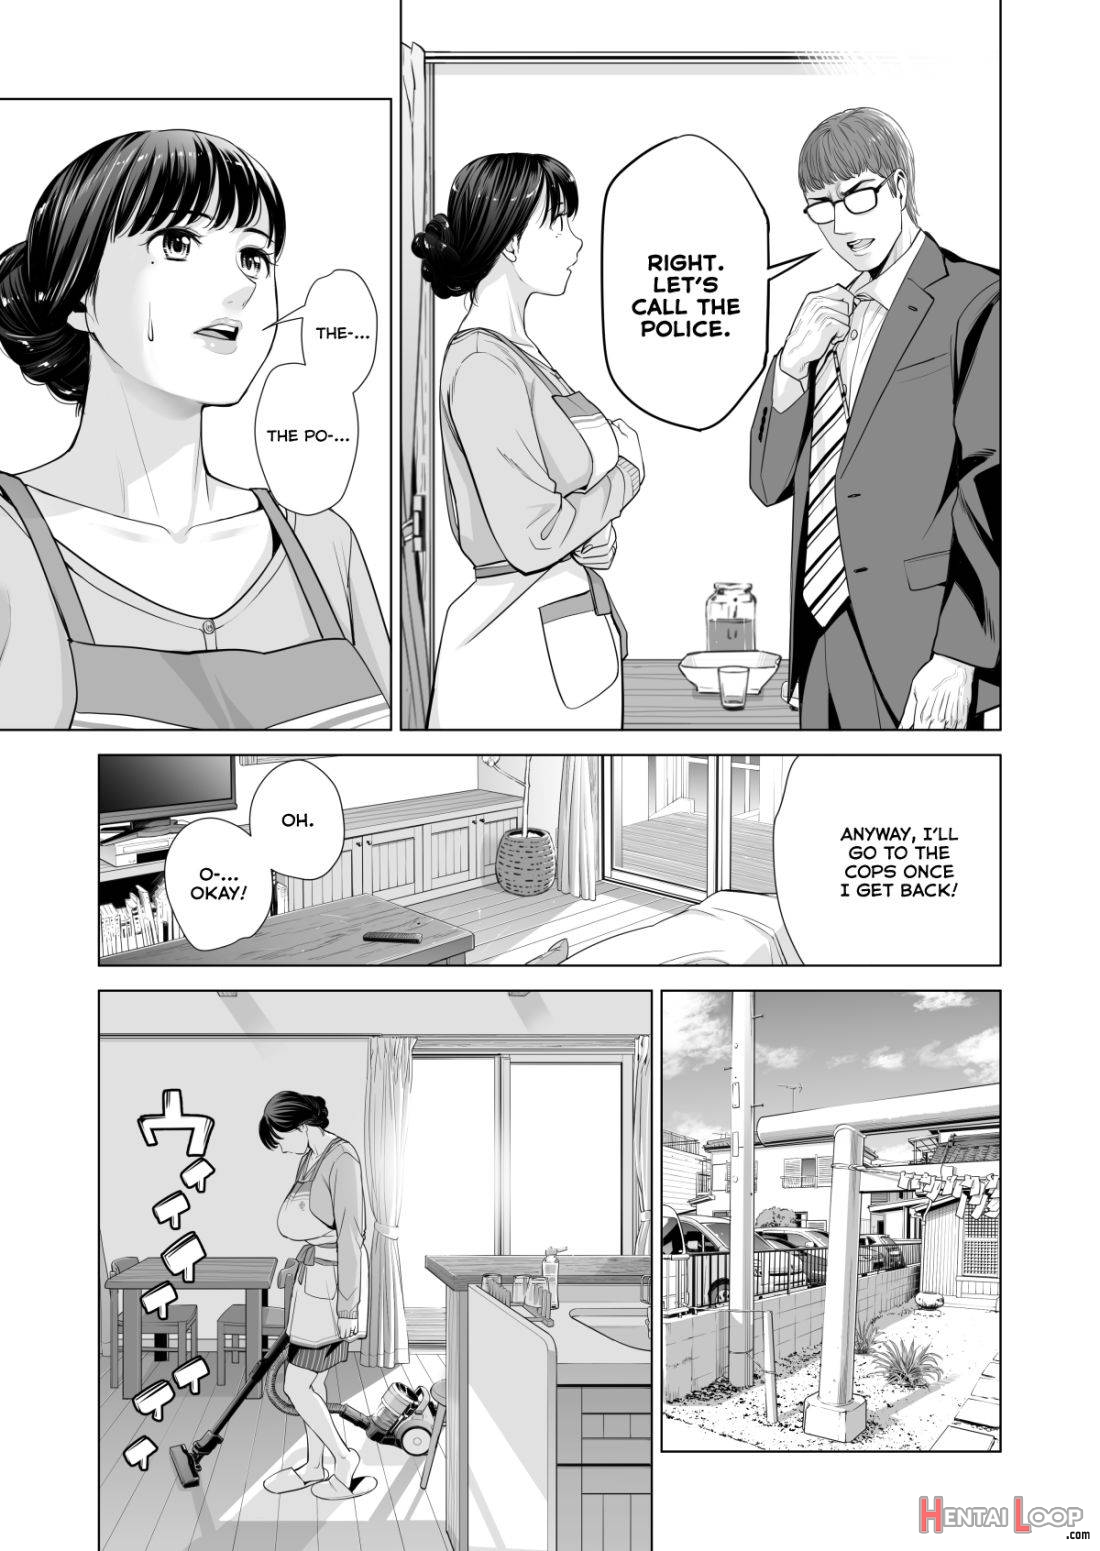 Tsukiyo no Midare Zake (Kouhen) Moonlit Intoxication ~ A Housewife Stolen by a Coworker Besides her Blackout Drunk Husband ~ Chapter 2 page 23